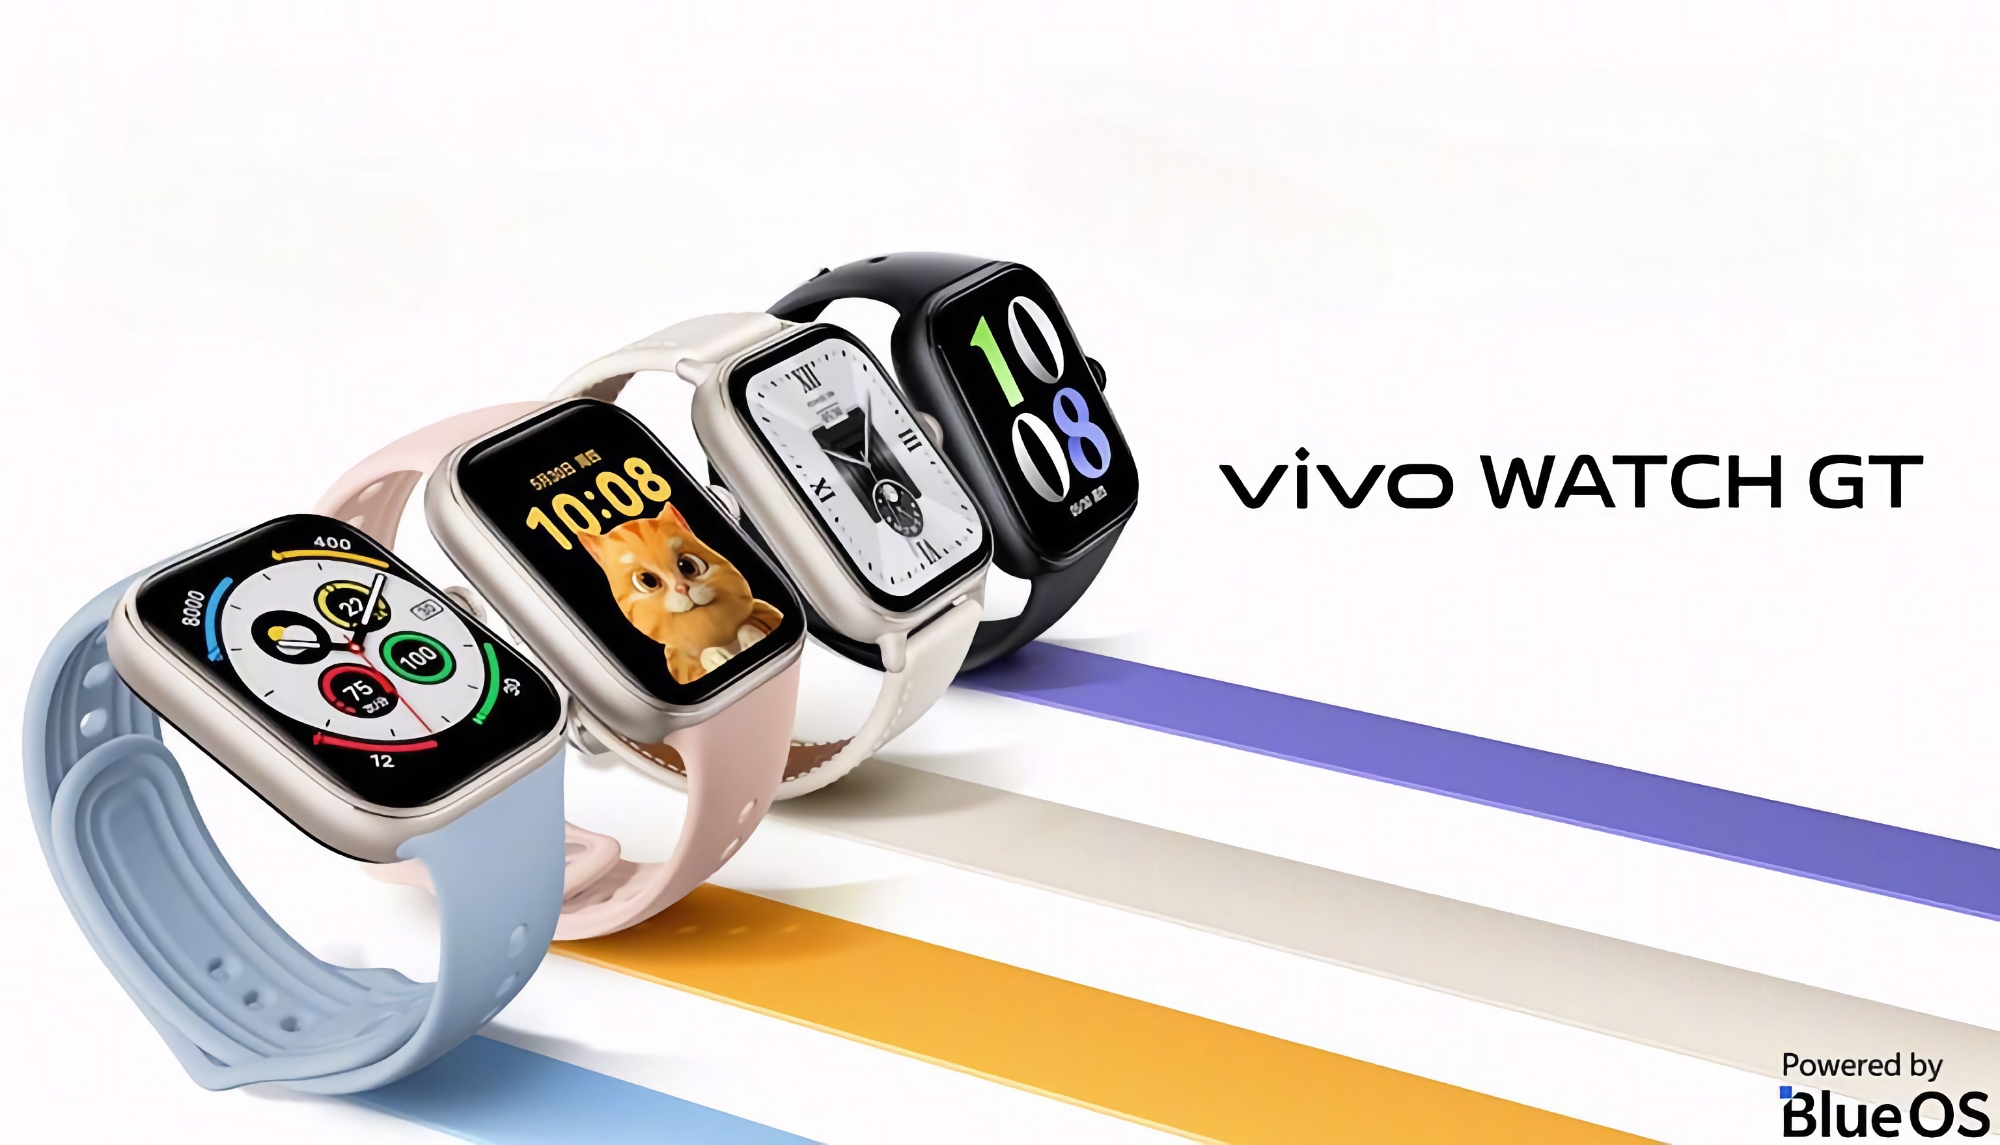 vivo WATCH GT: 1.85″ AMOLED display, eSIM support and up to 21 days of battery life priced from $110